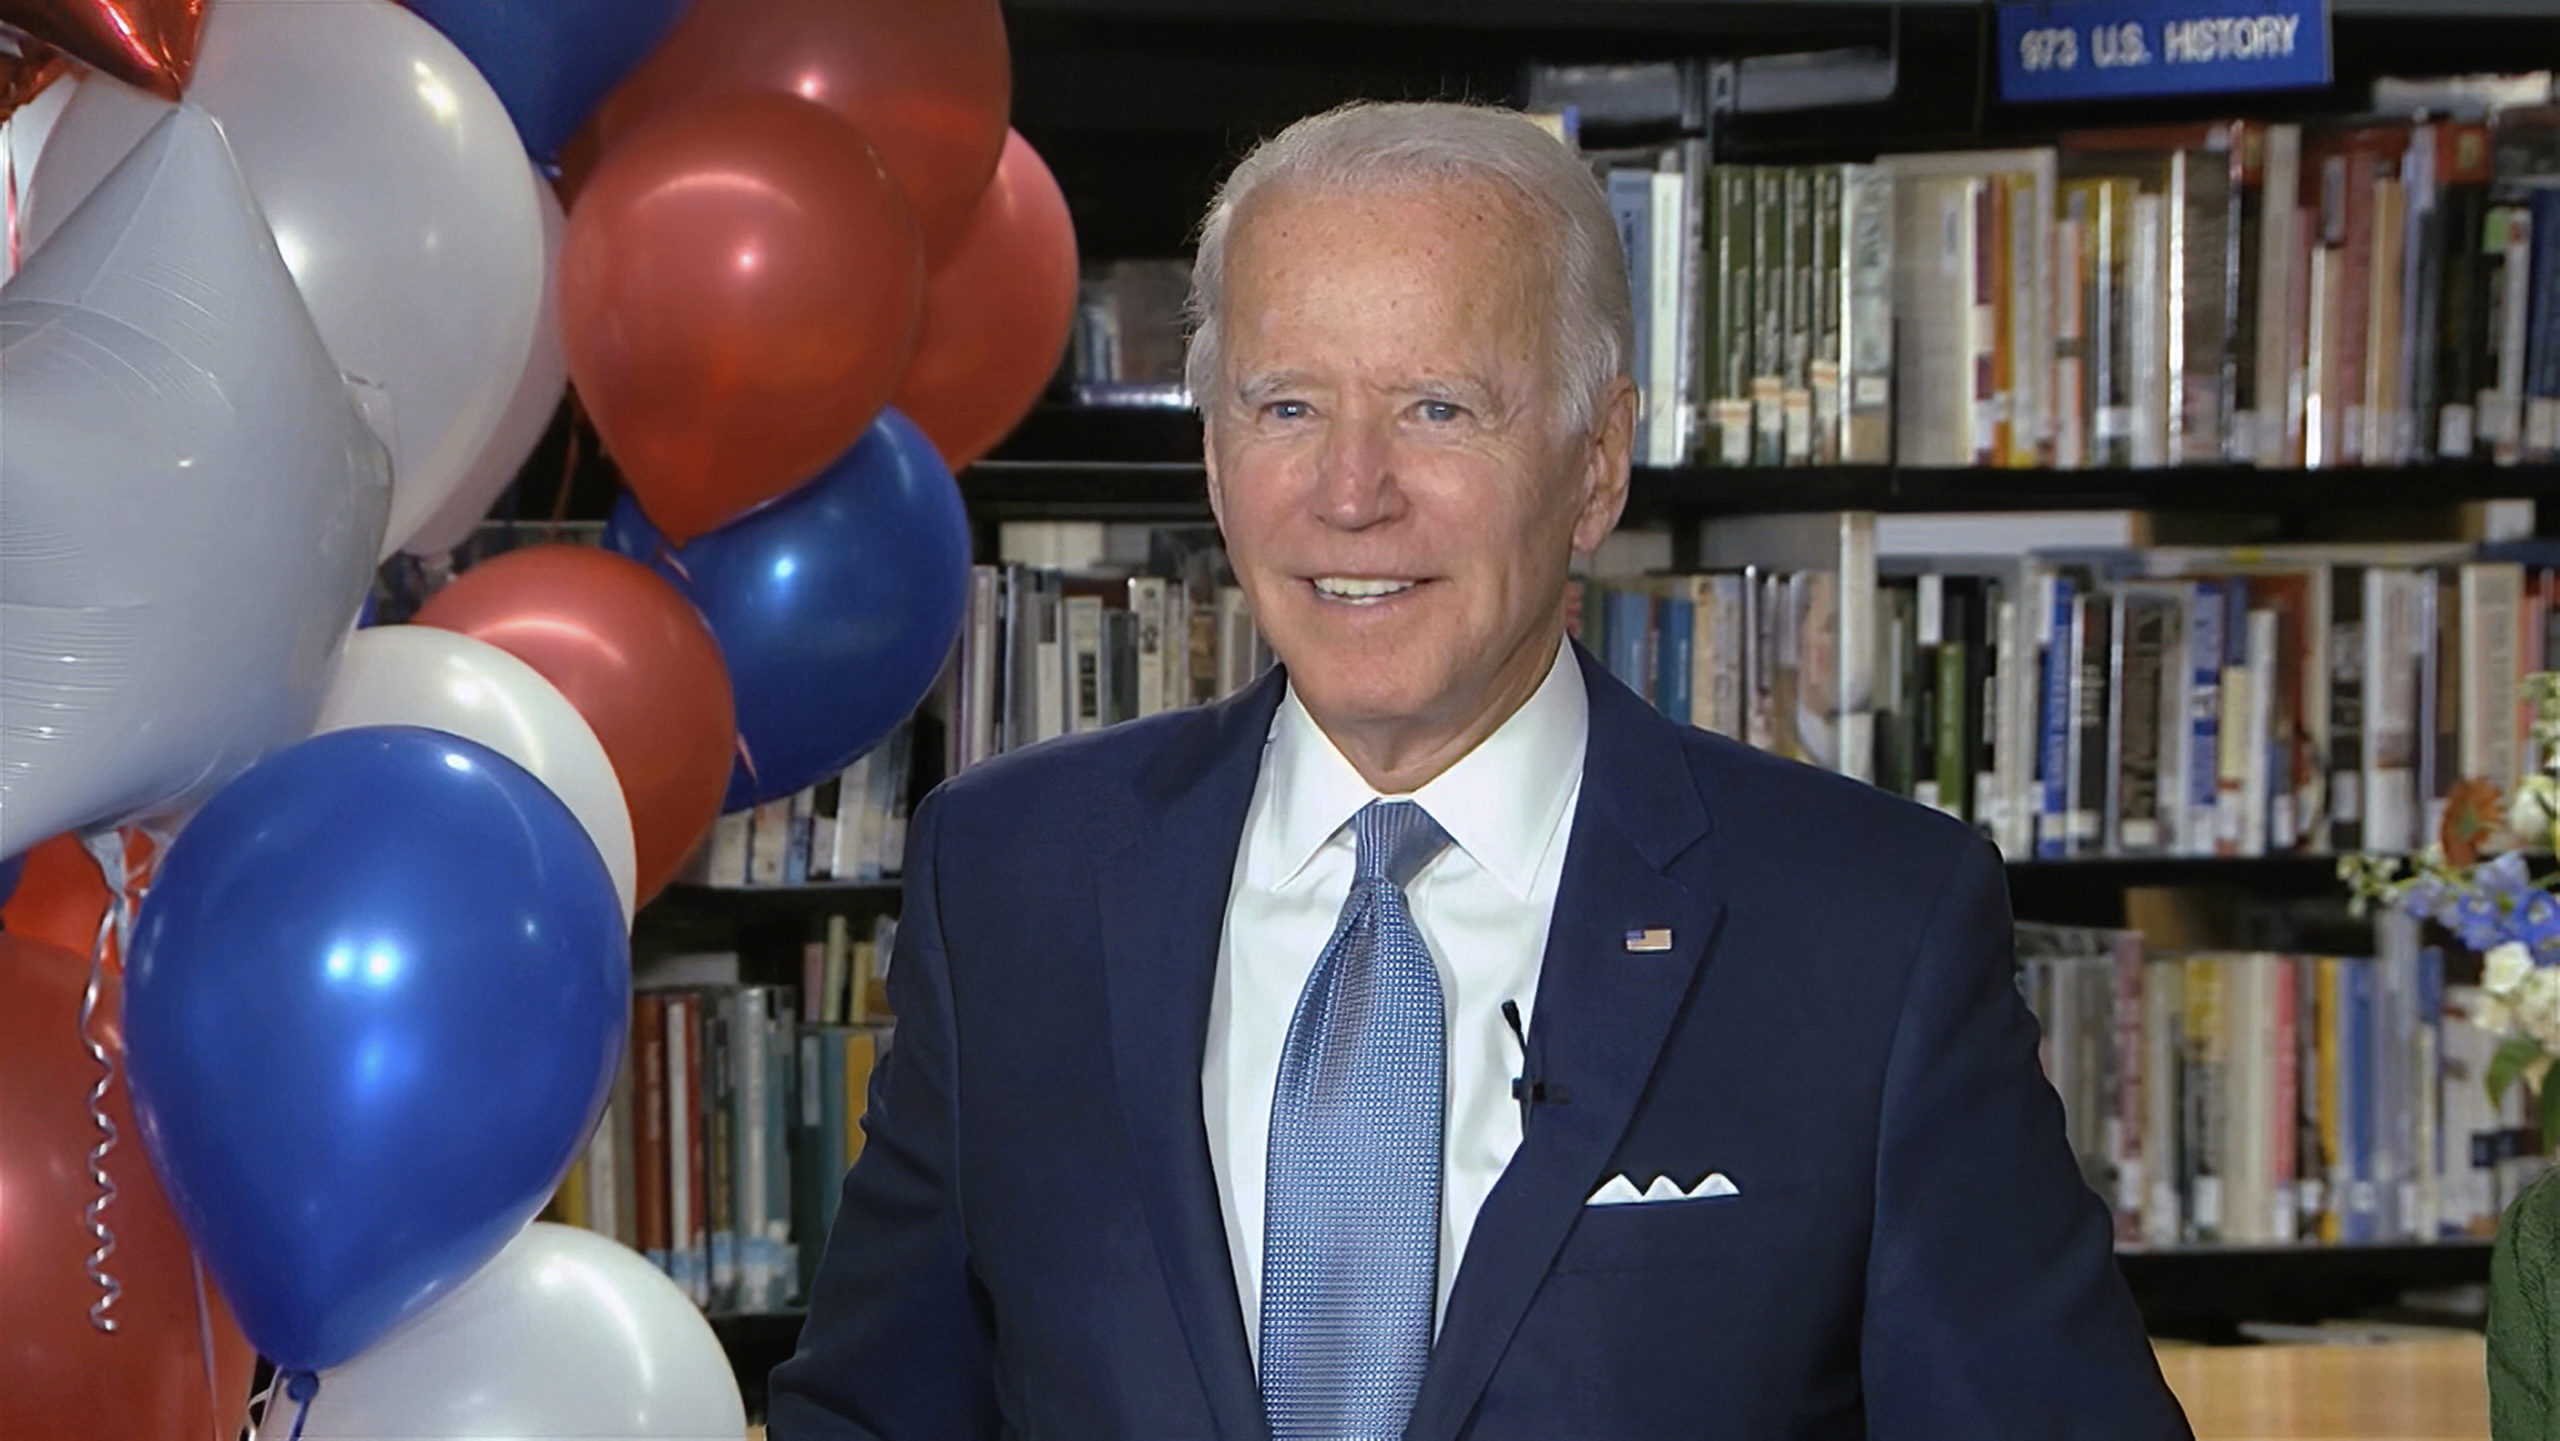 AFT Campaigned for Biden from Coast to Coast